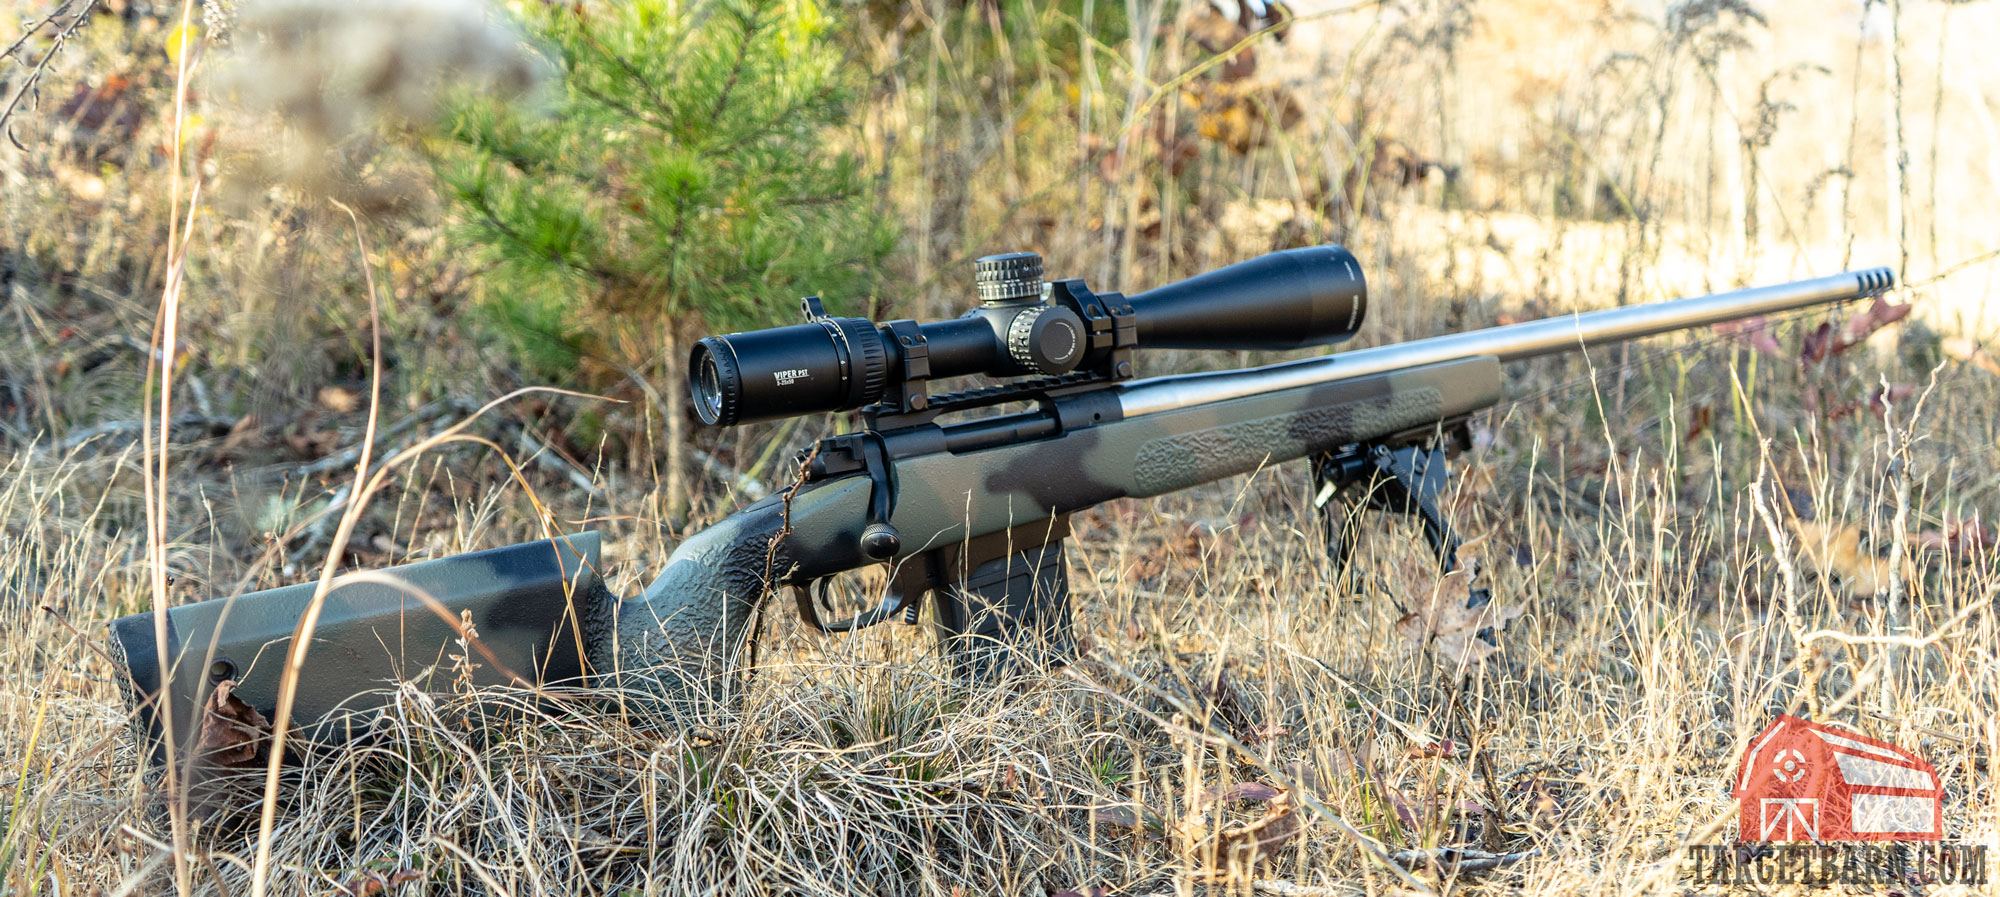 a vortex viper pst scope mounted on a bolt action rifle